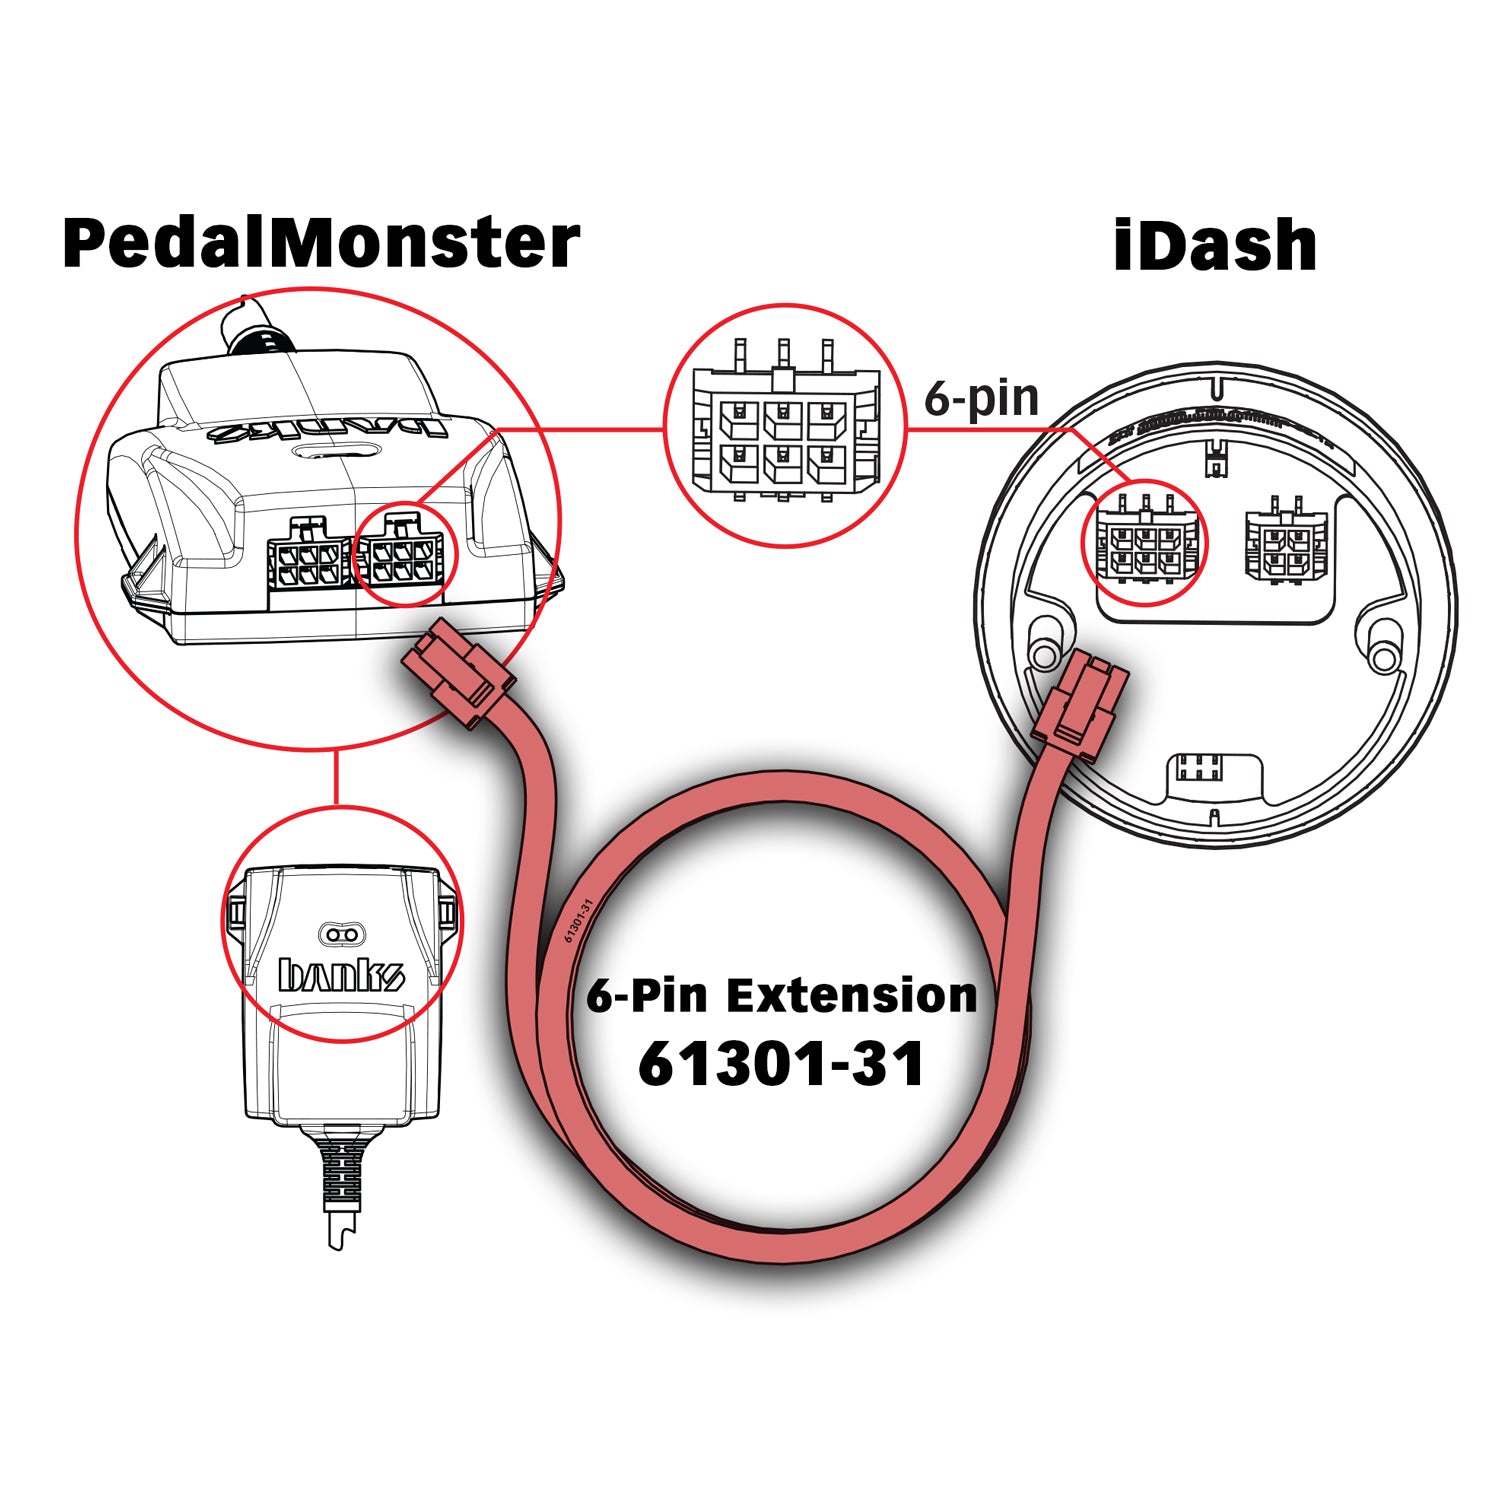 Where your 6 Pin connects to your PedalMonster and iDAsh